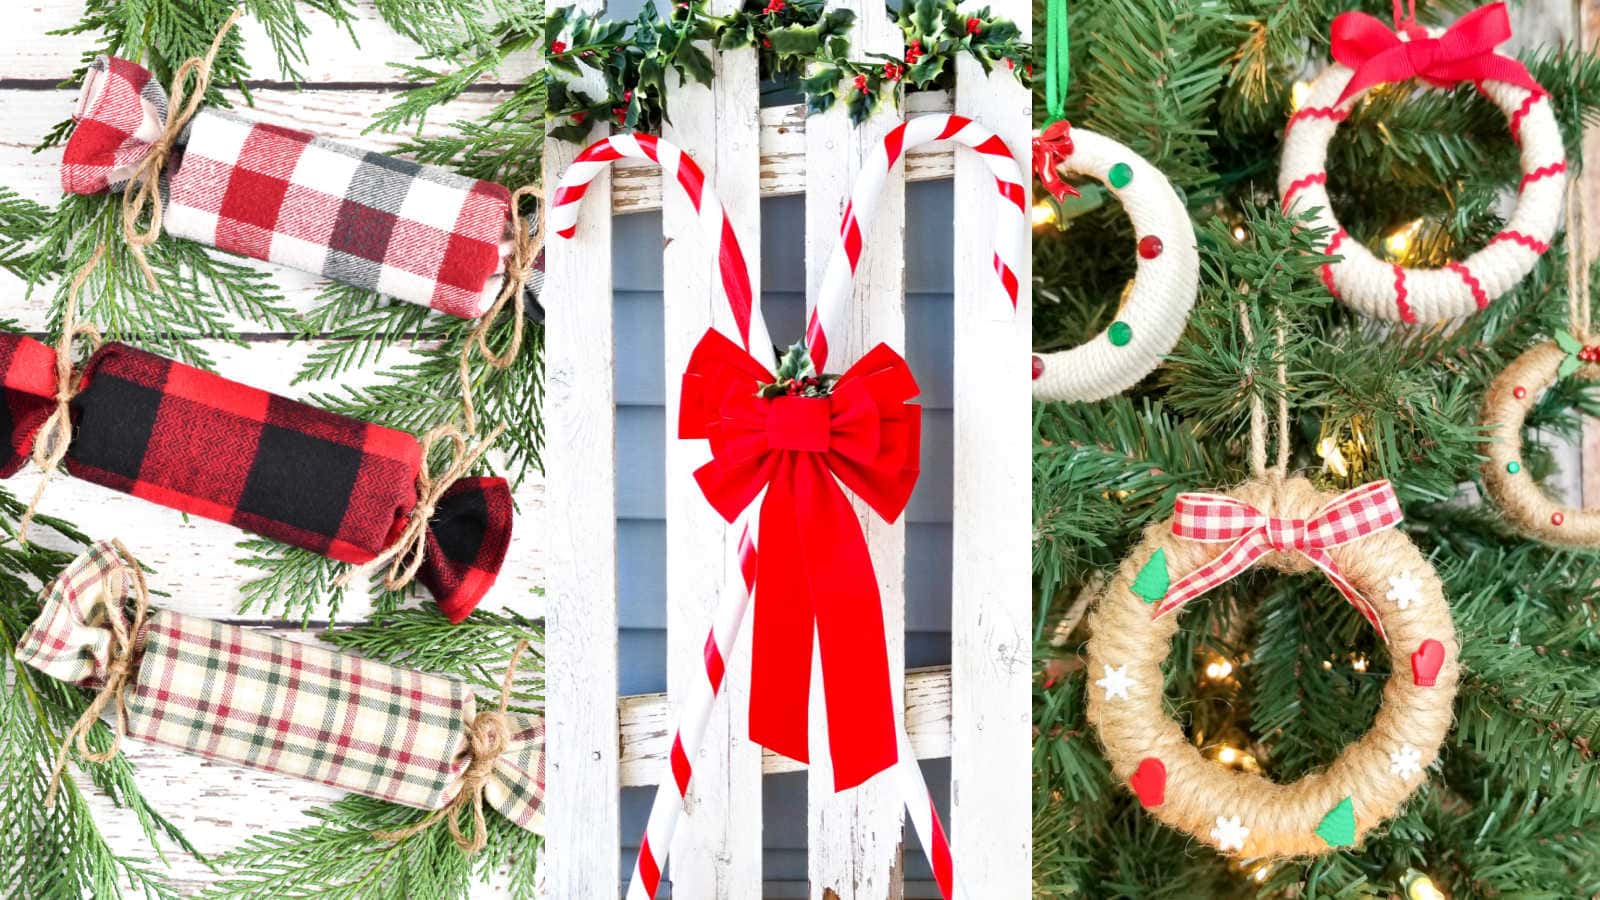 Christmas Craft Projects for a Festive Holiday Season